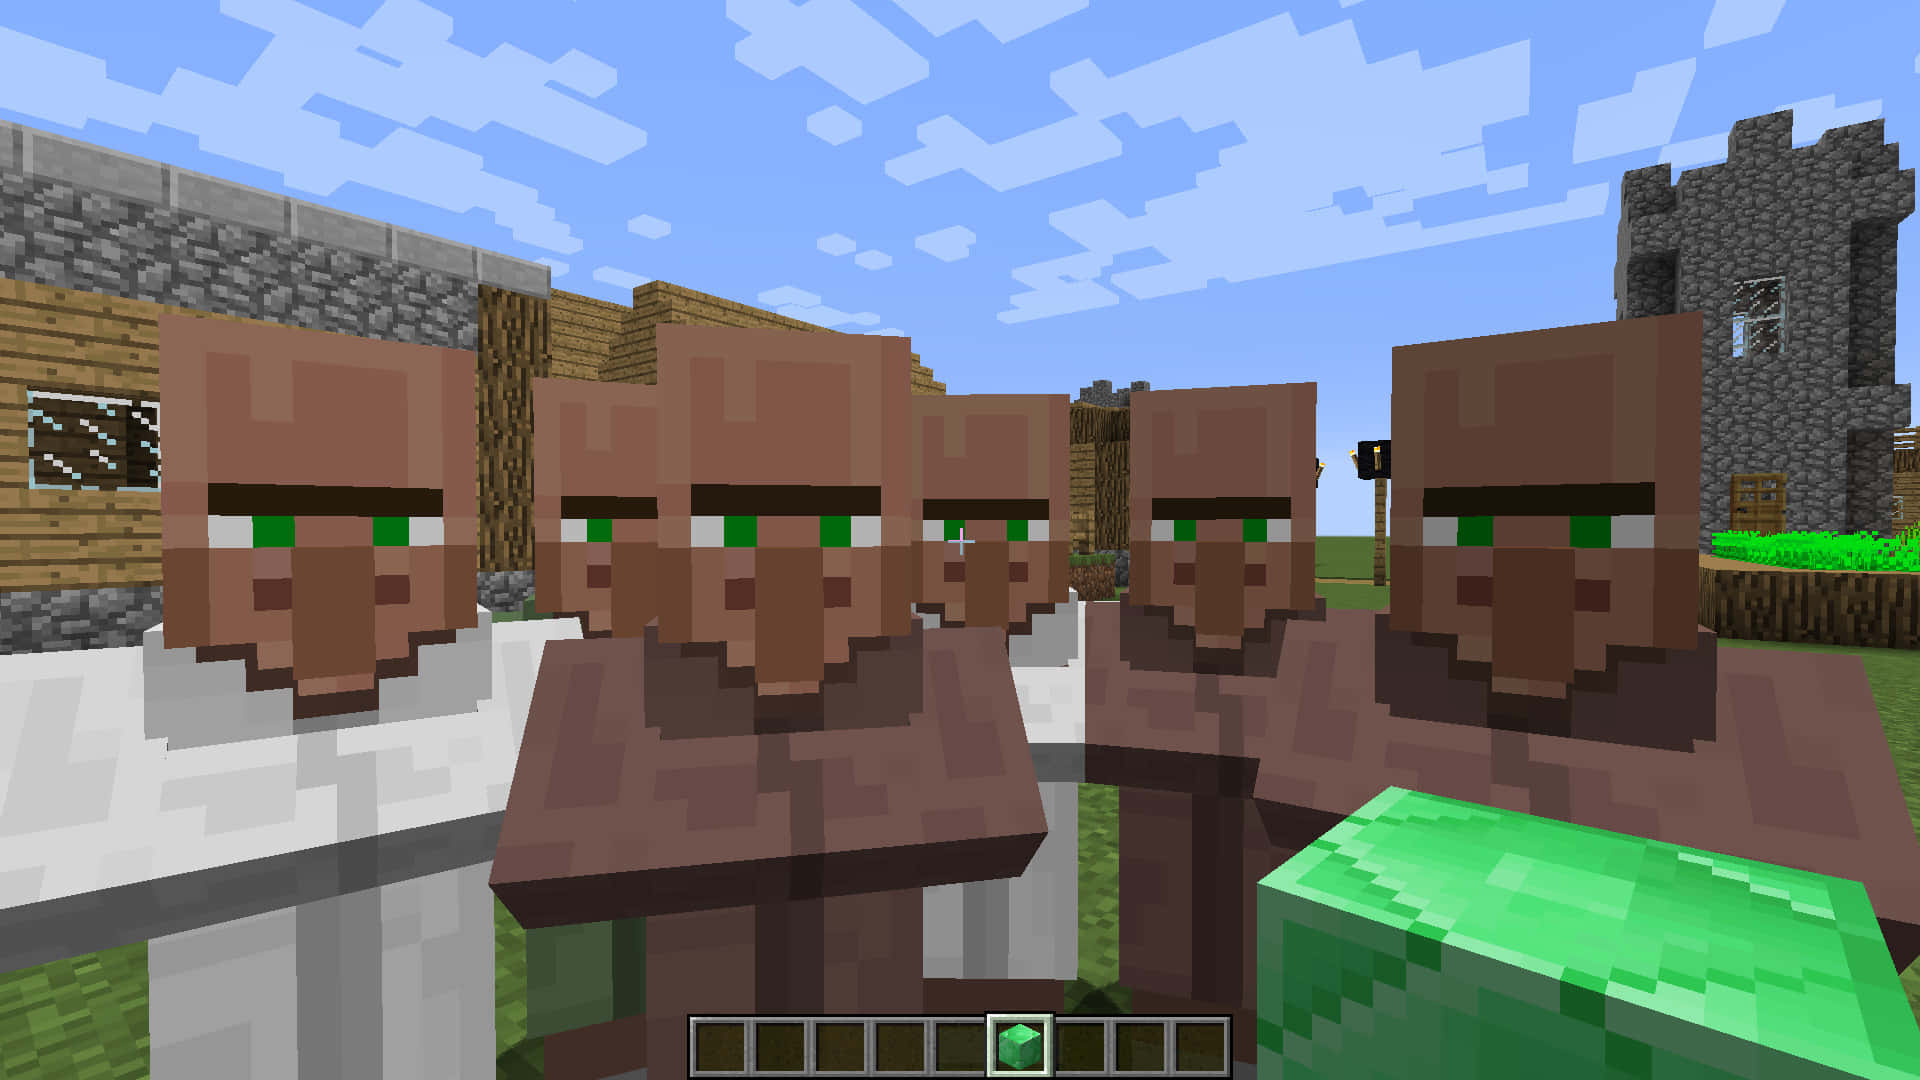 Interactive Villager in the World of Minecraft Wallpaper